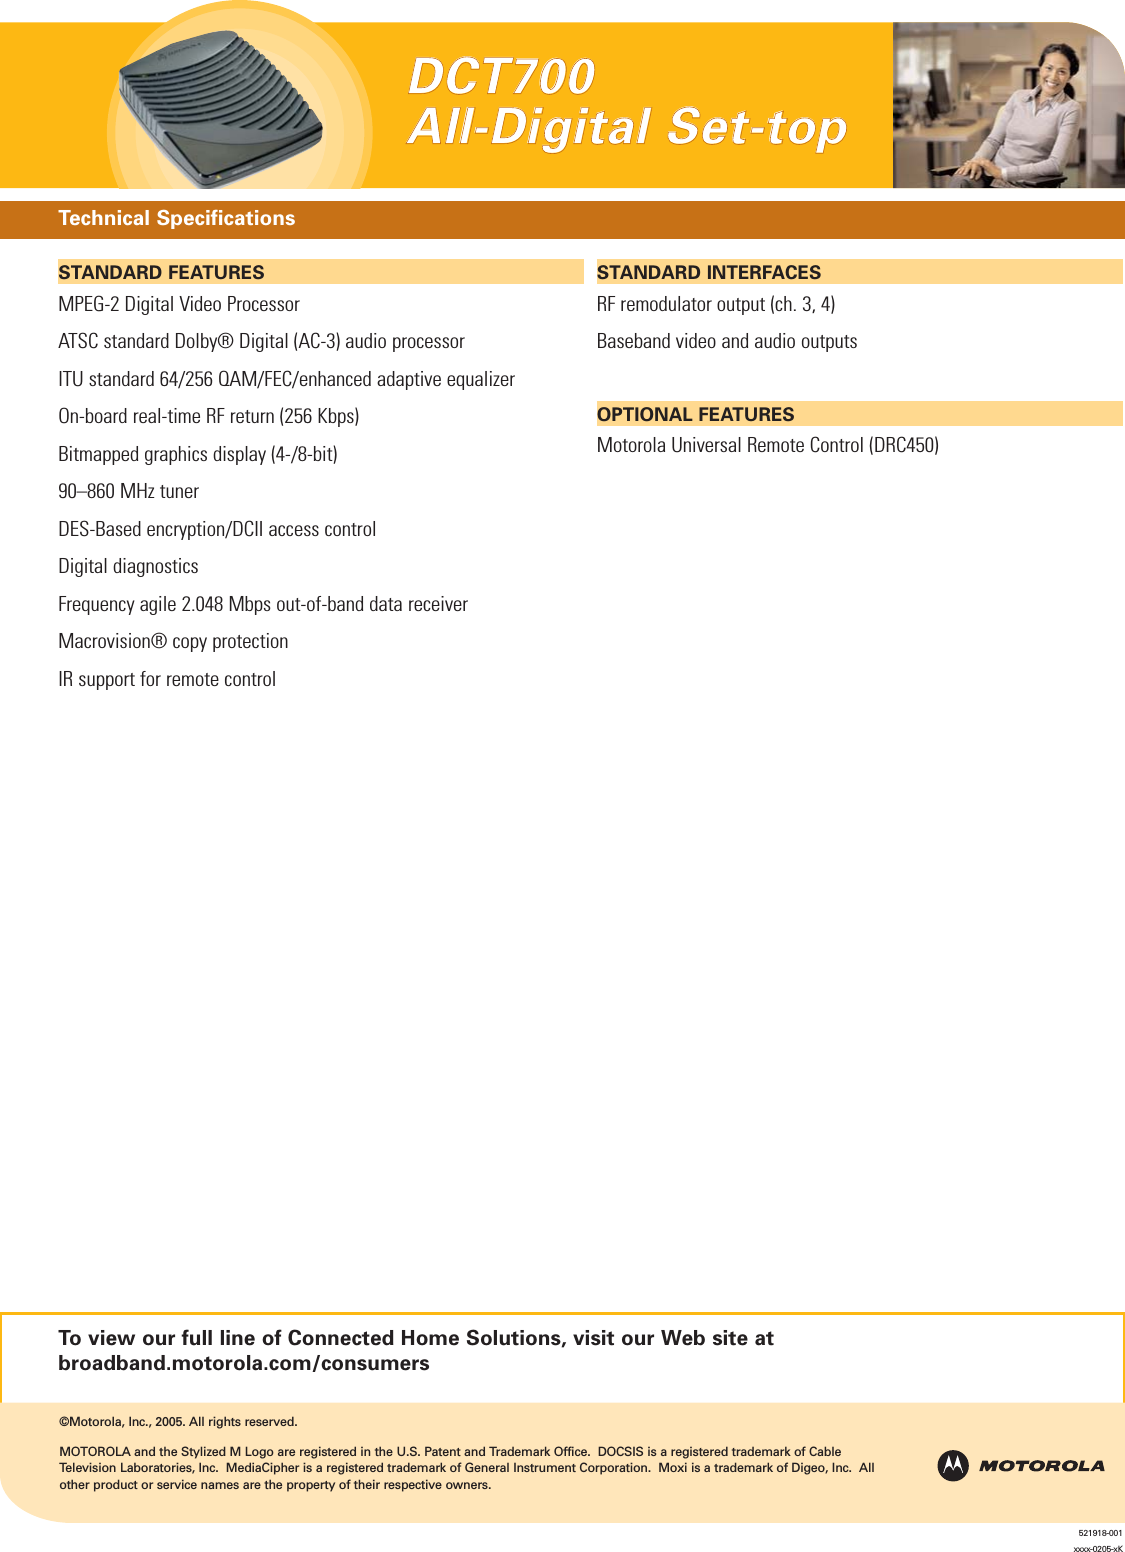 Page 2 of 2 - Arris DCT700 521918-001_dct700_021605_nt.qxp User Manual Specifications Data Sheet